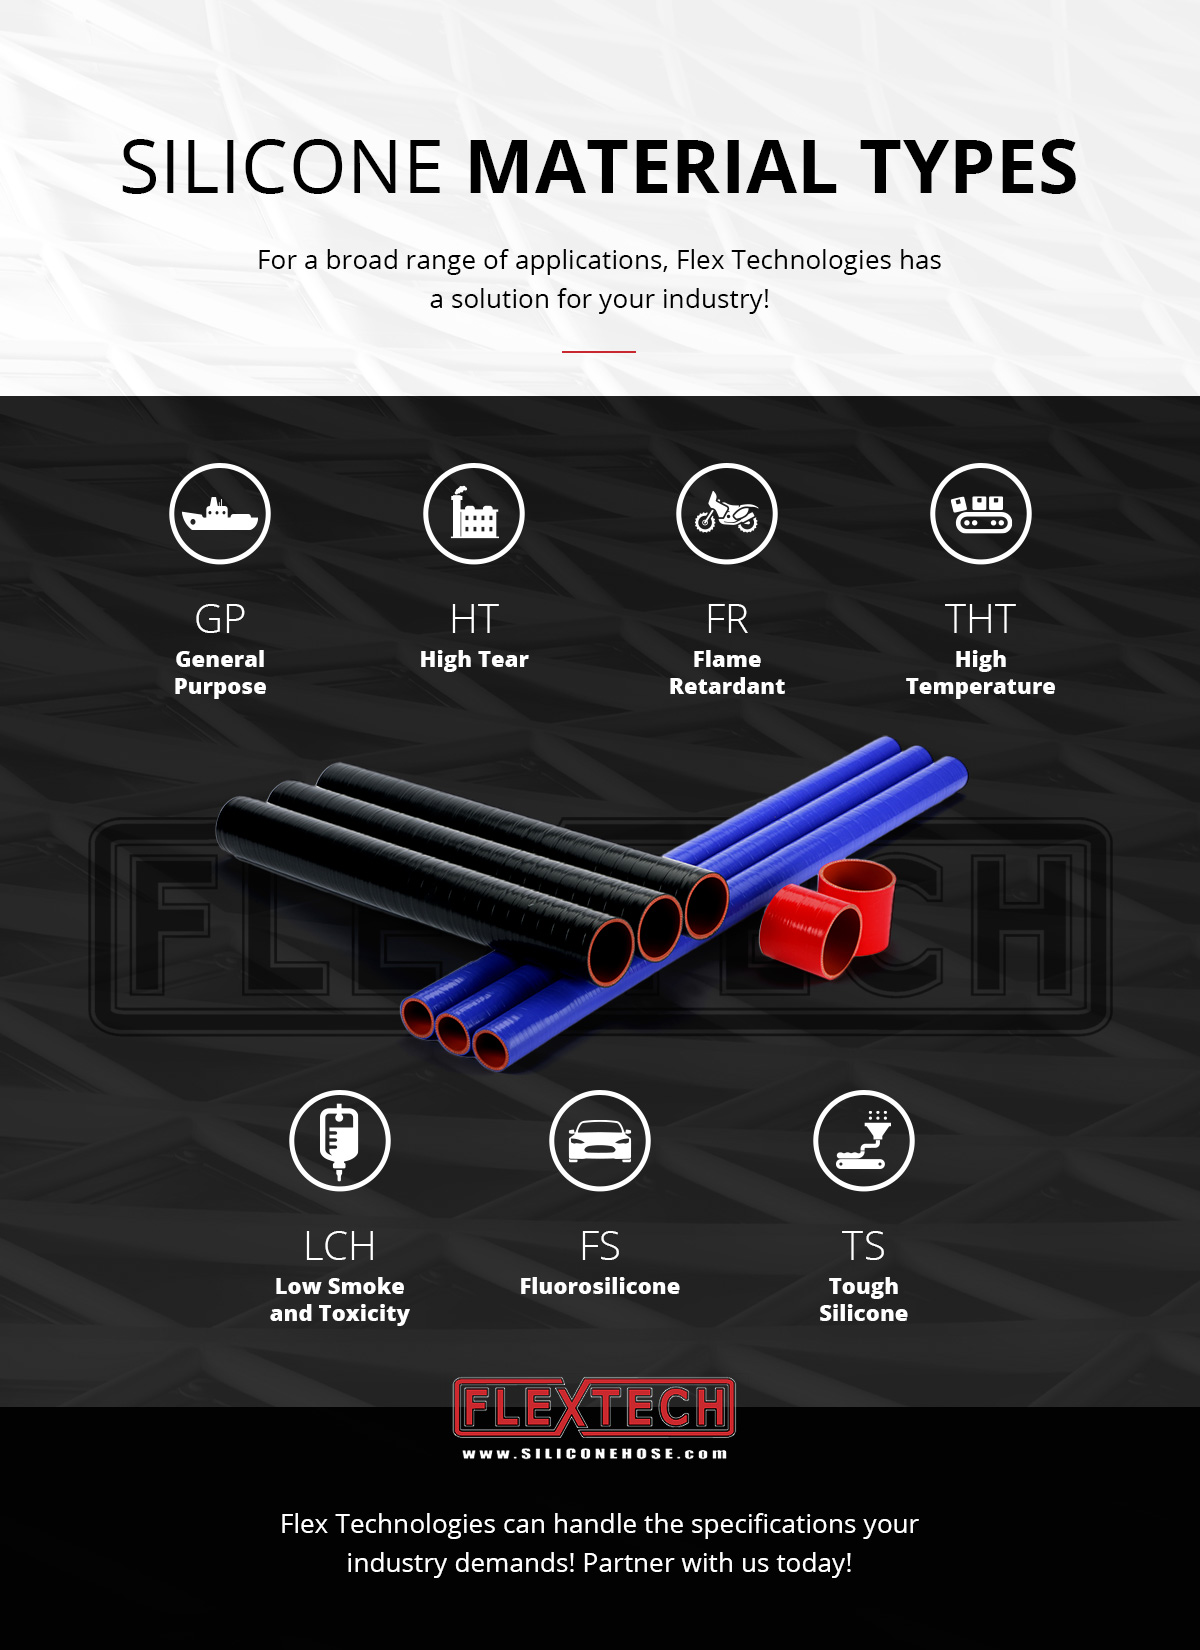 silicone-material-types-infographic.jpg